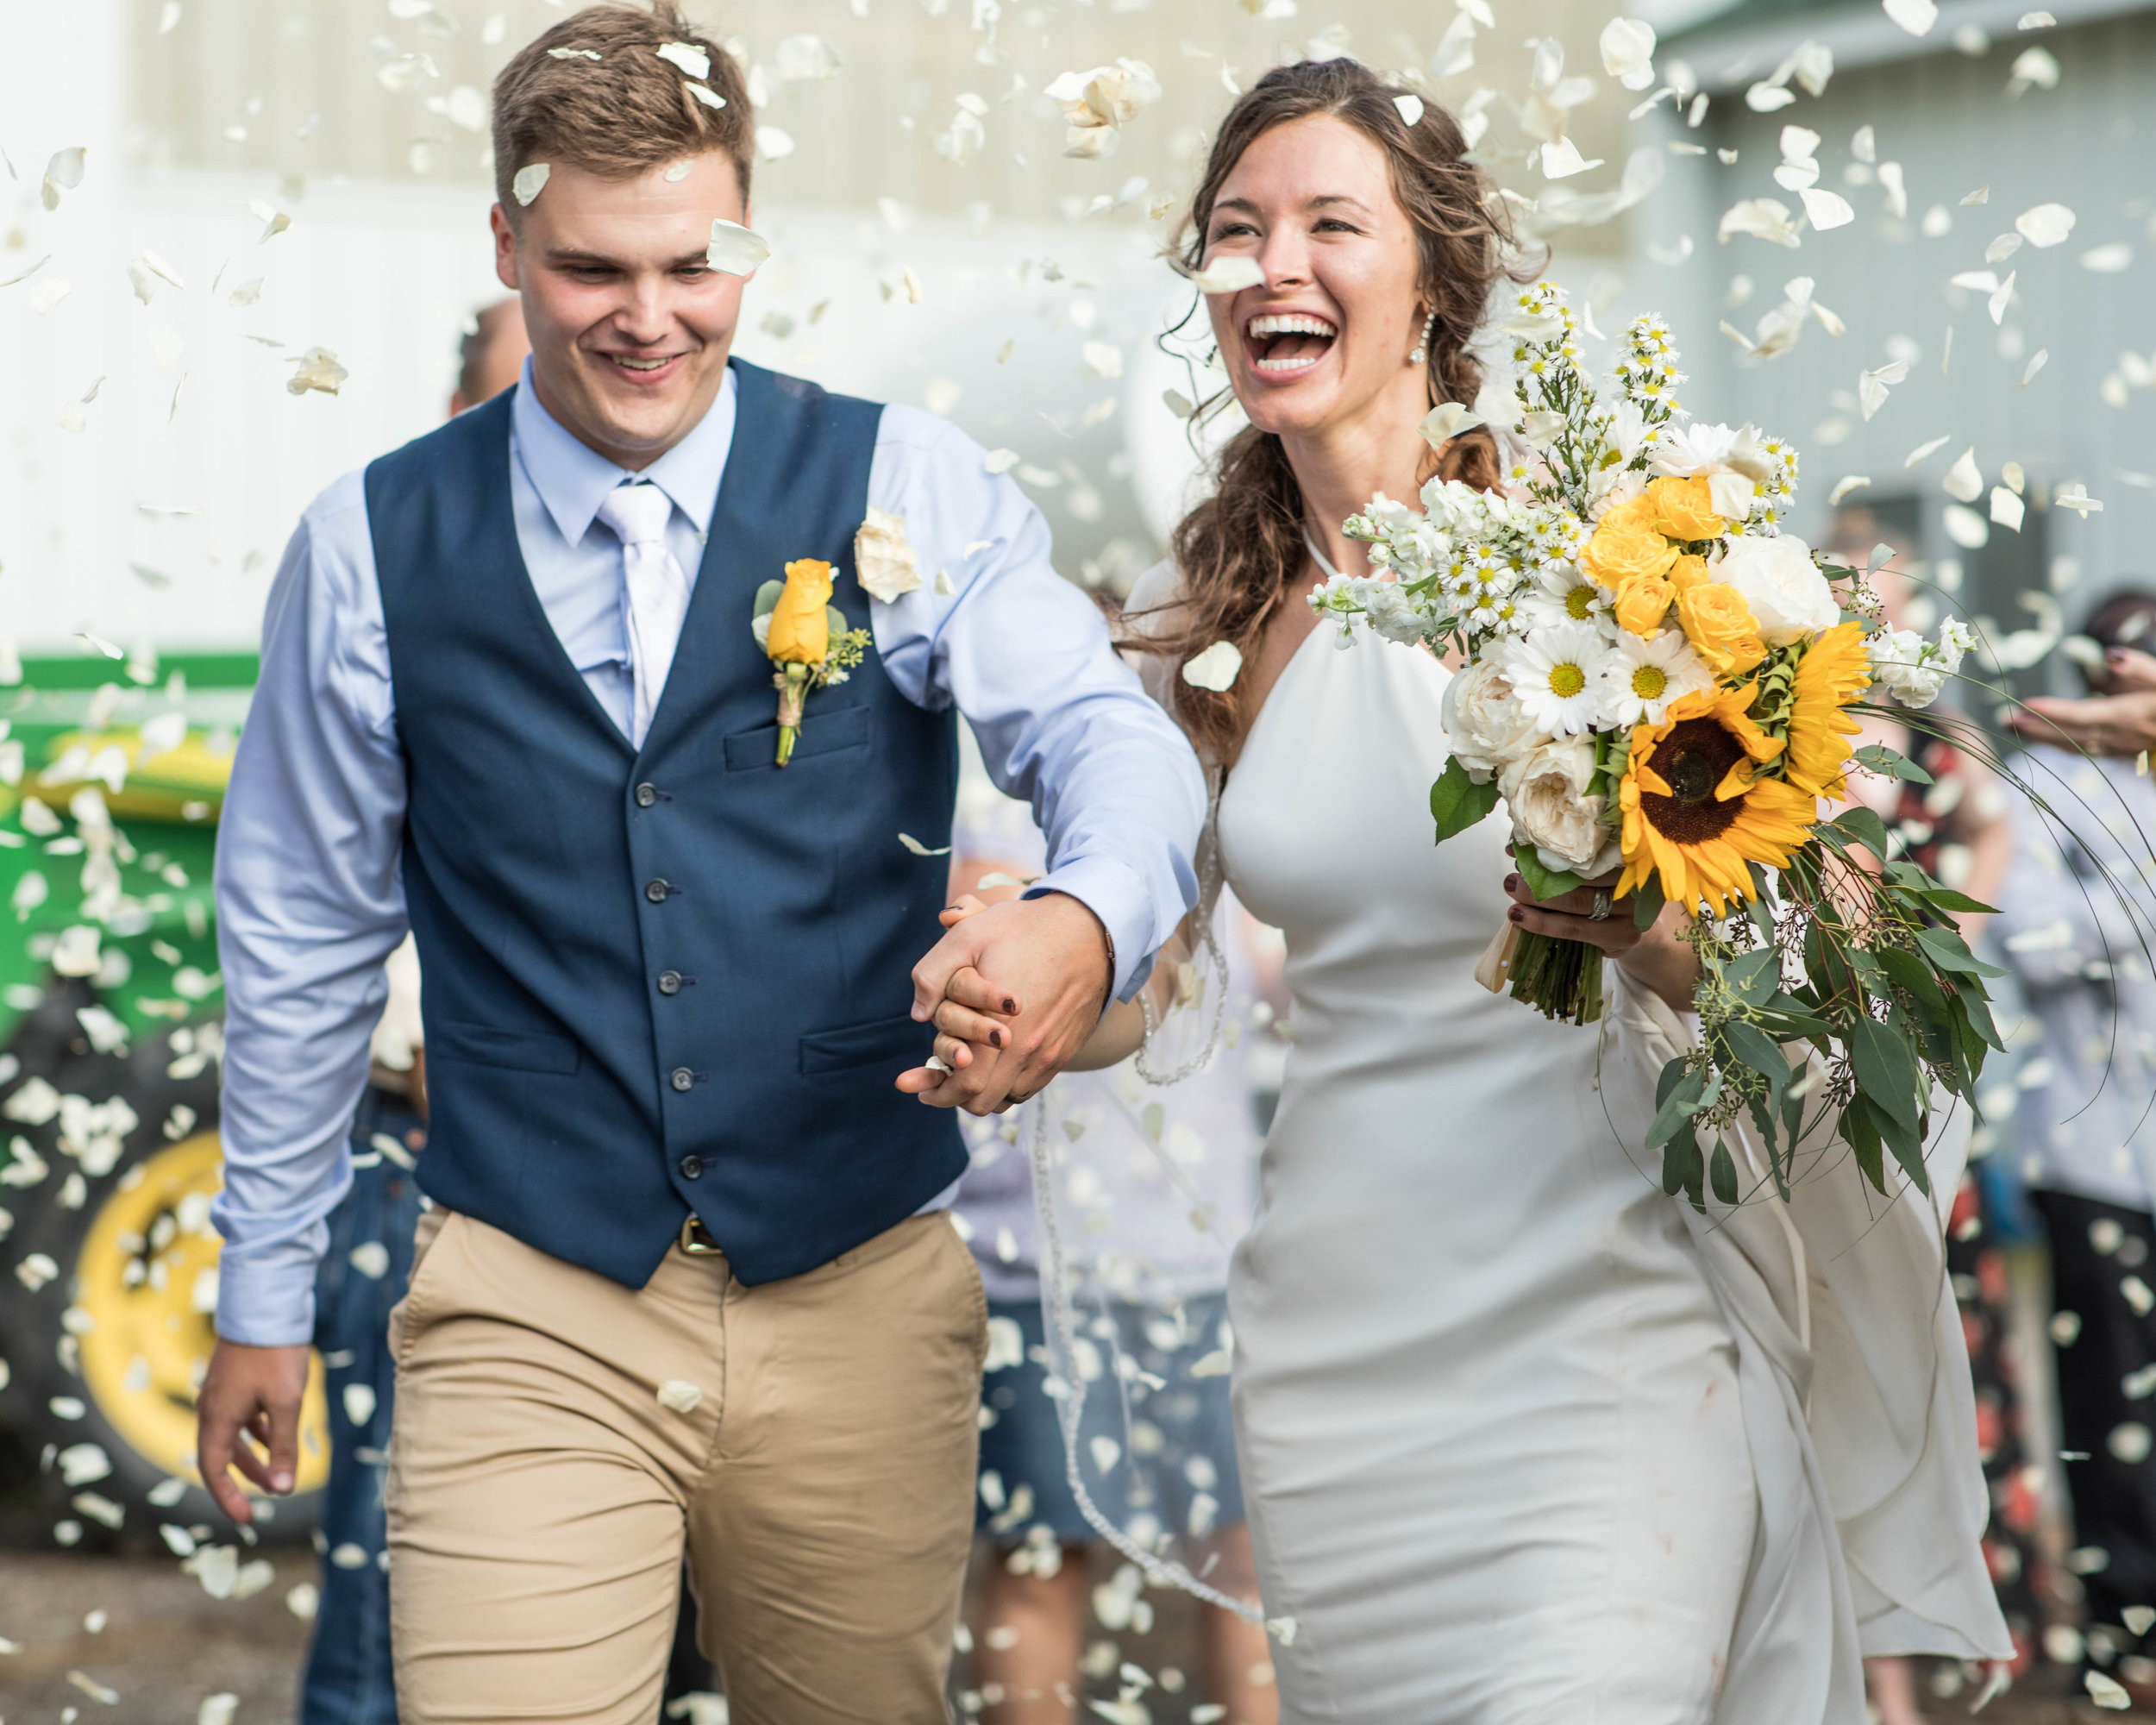  flower pedals are thrown at the bride and groom as they exit for their honeymoon 